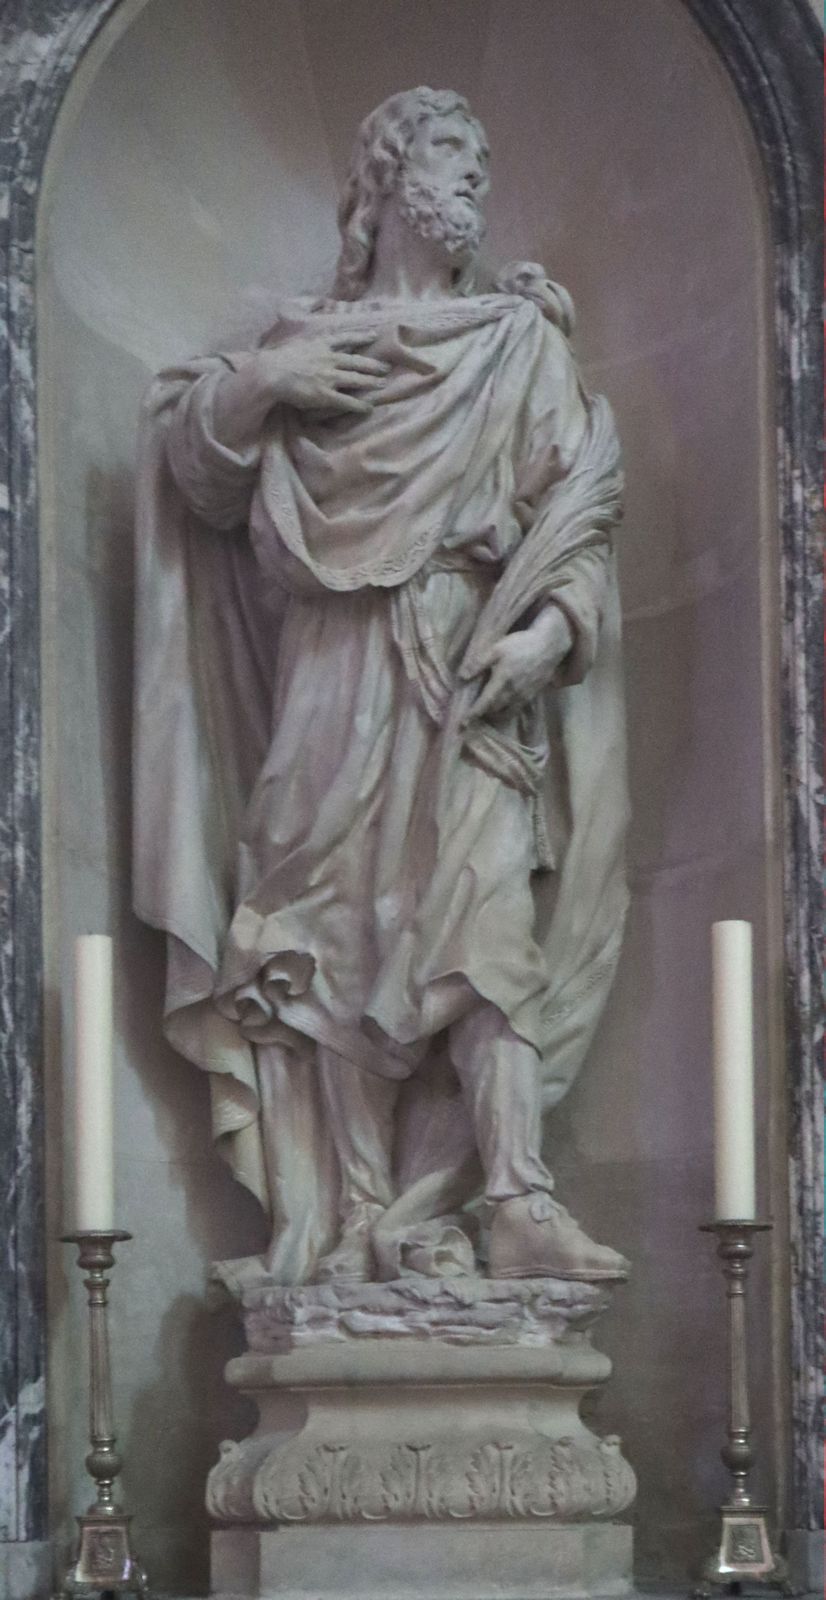 Valerius-Statue in der Kathedrale in Soissons